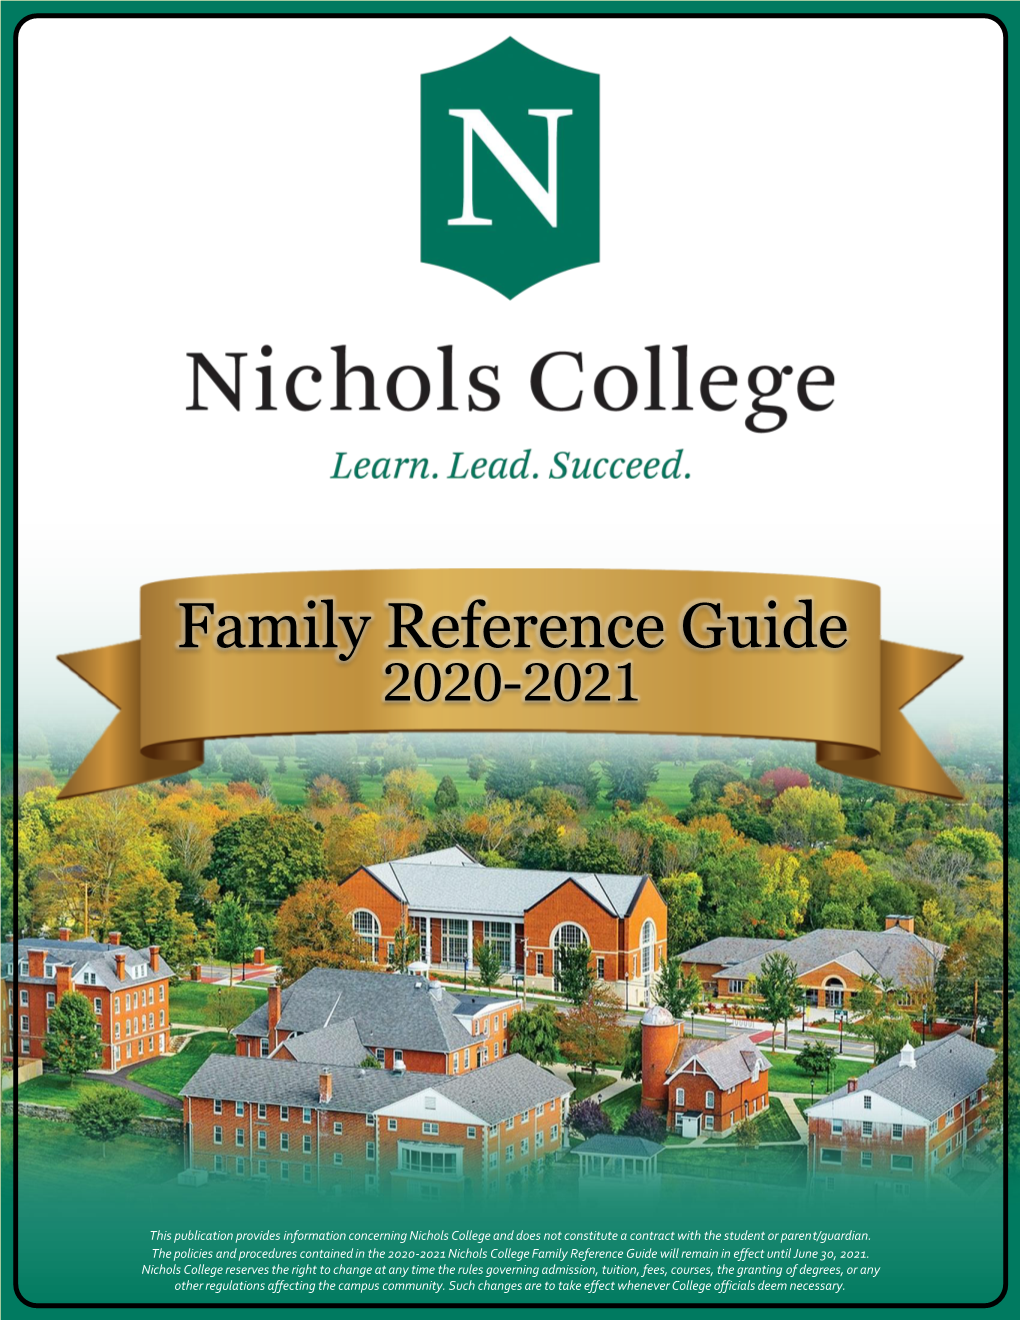 Family Reference Guide 2020-2021